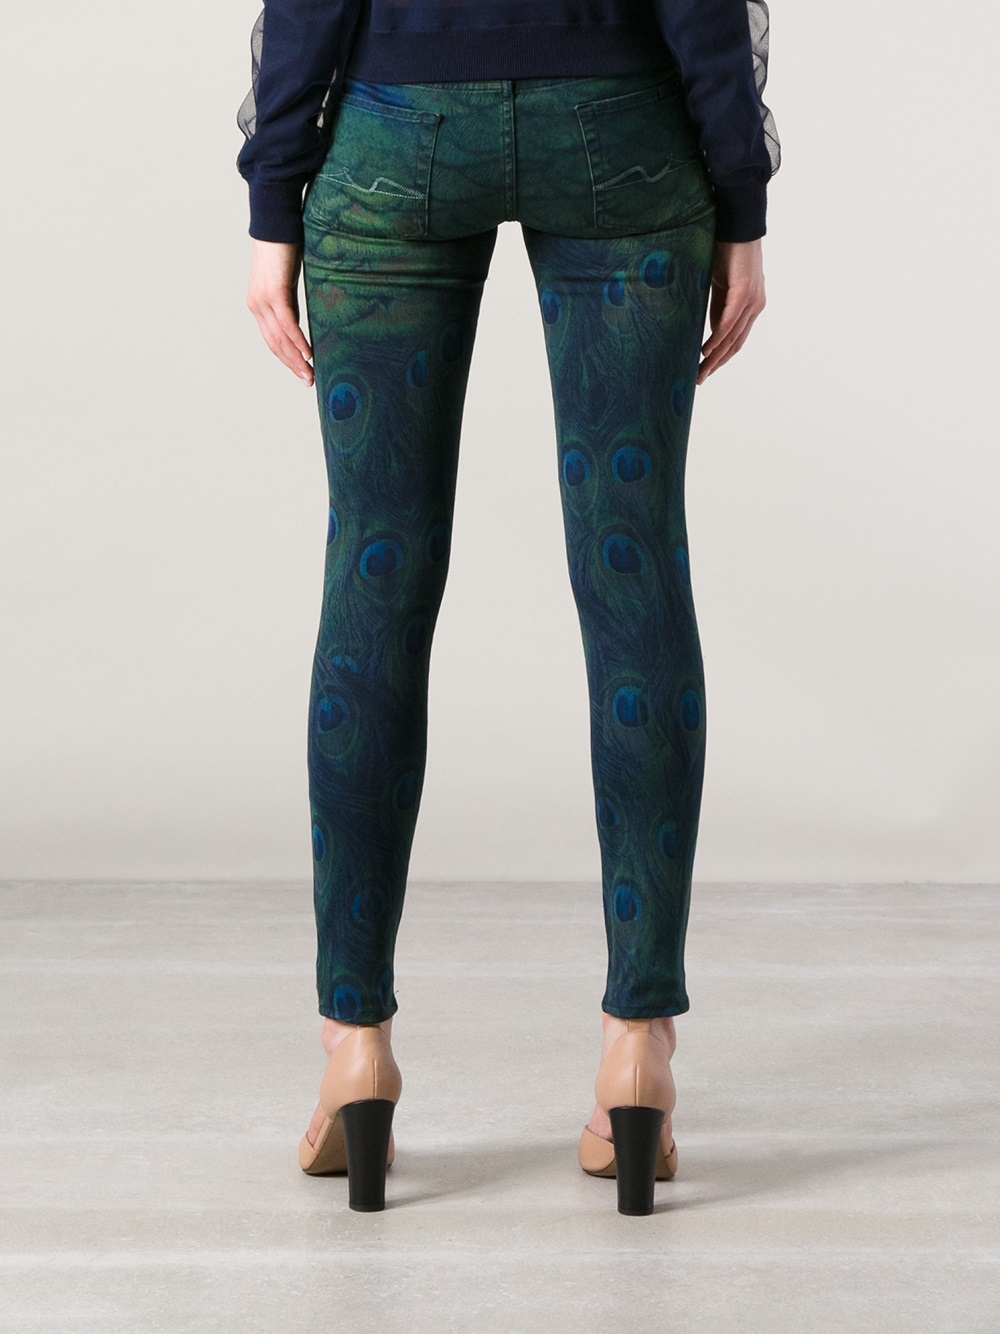 7 For All Mankind Peacock Print Skinny Jean in Blue - Lyst